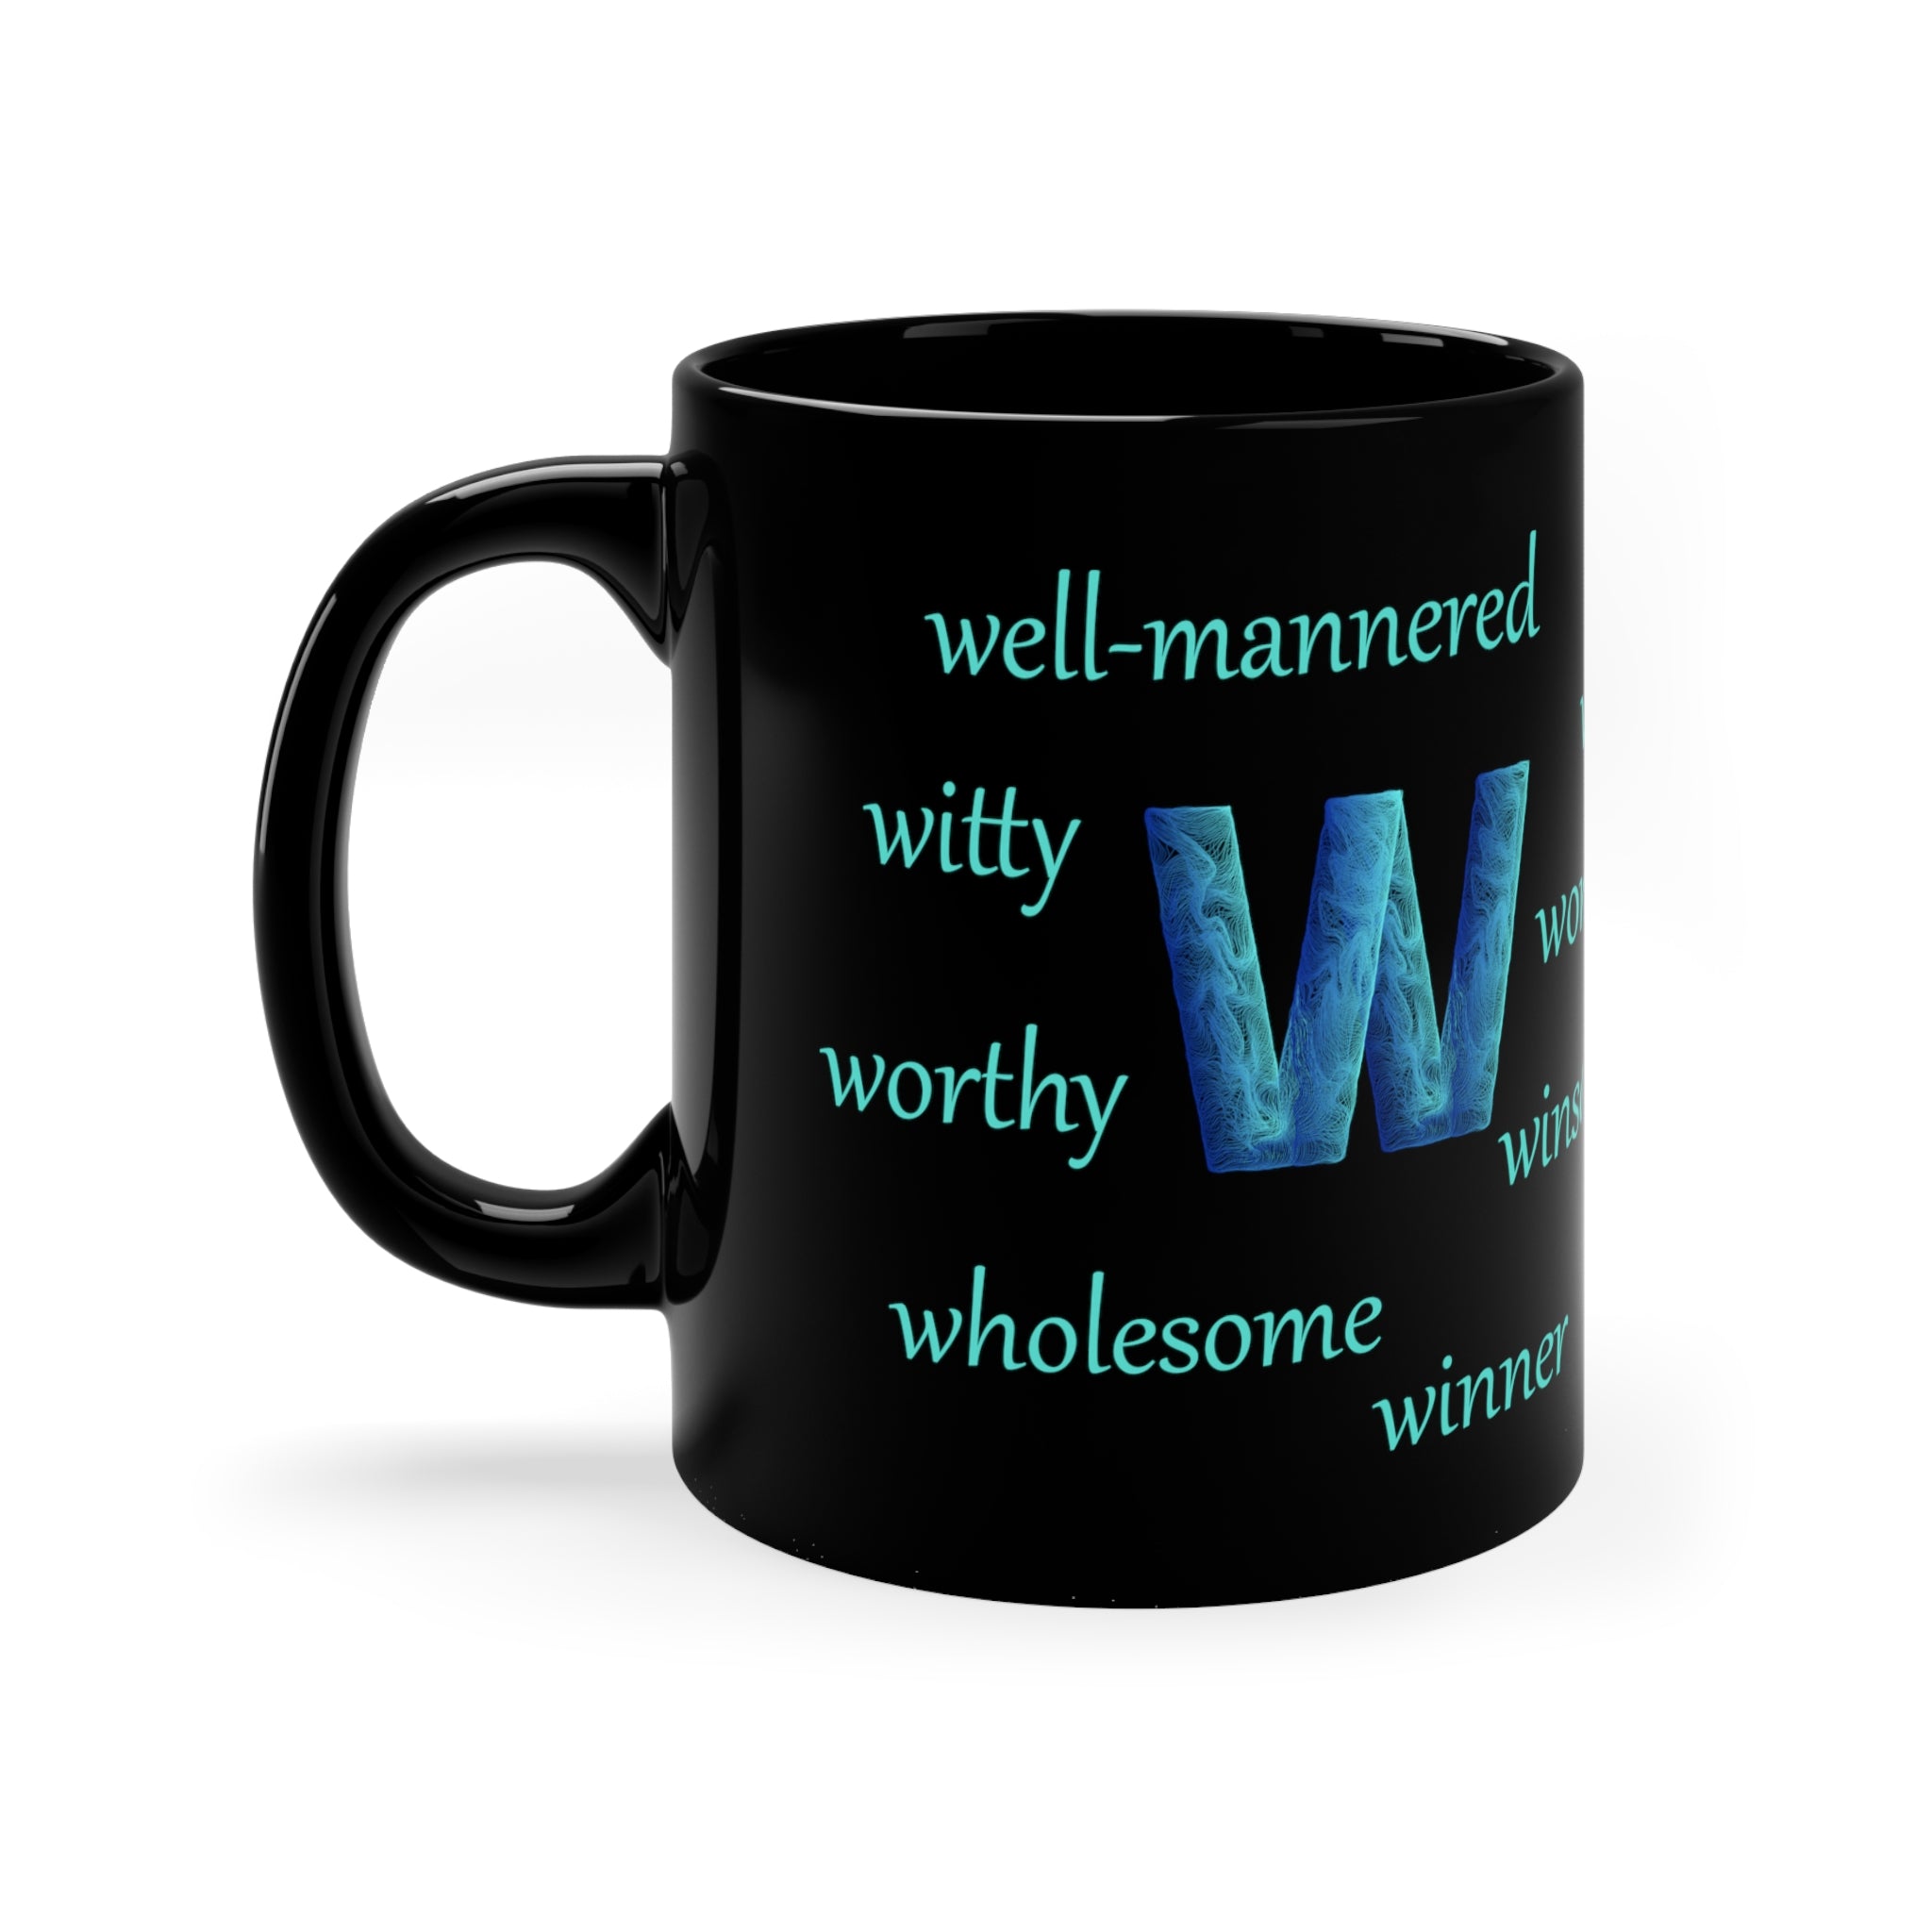 11oz black ceramic mug with the letter W surrounded by motivating w words